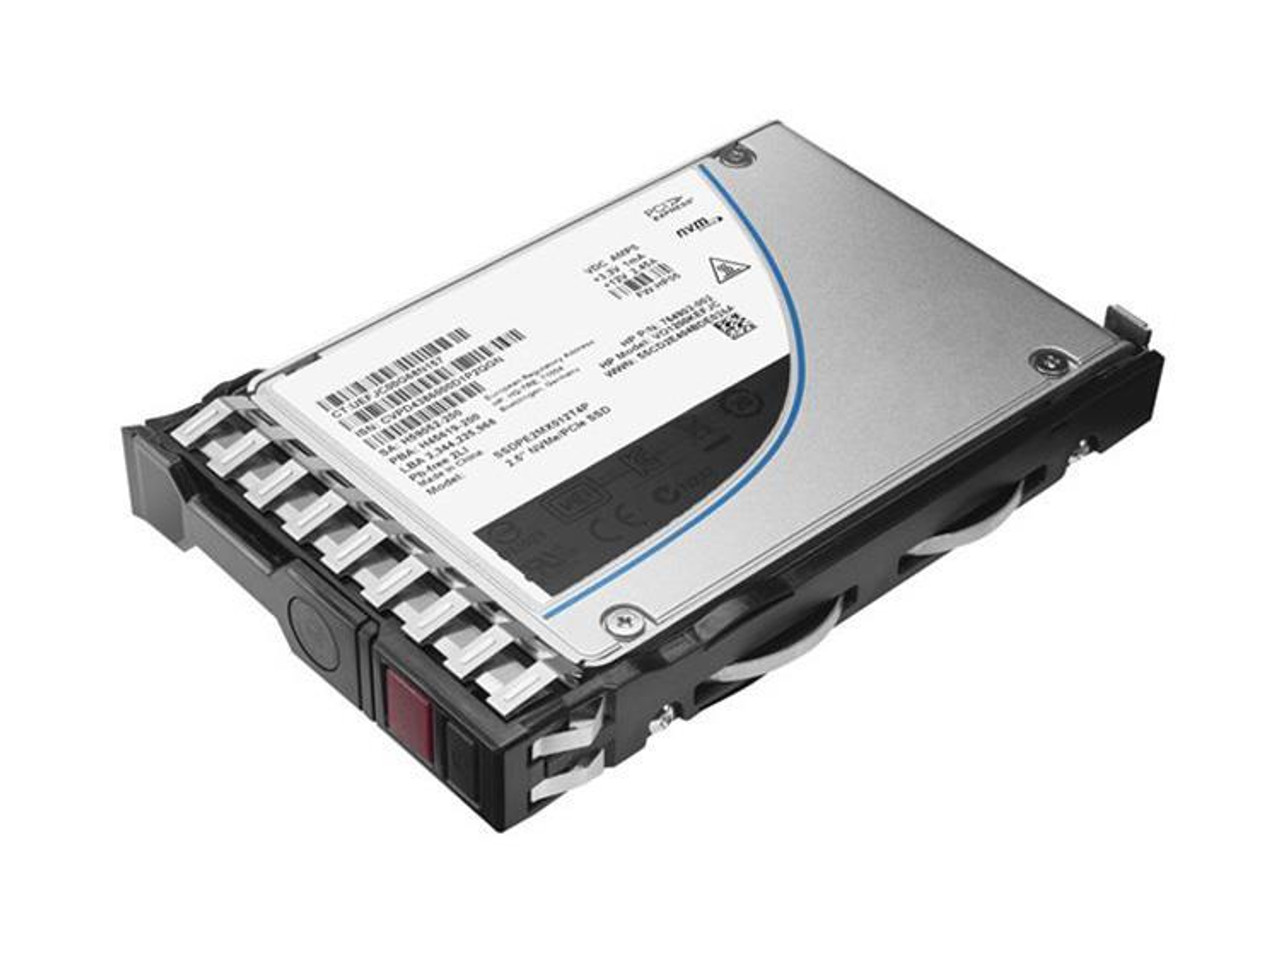 875509-K21#0D1 HPE 480GB SATA 6Gbps Read Intensive 2.5-inch Internal Solid State Drive (SSD) with Smart Carrier